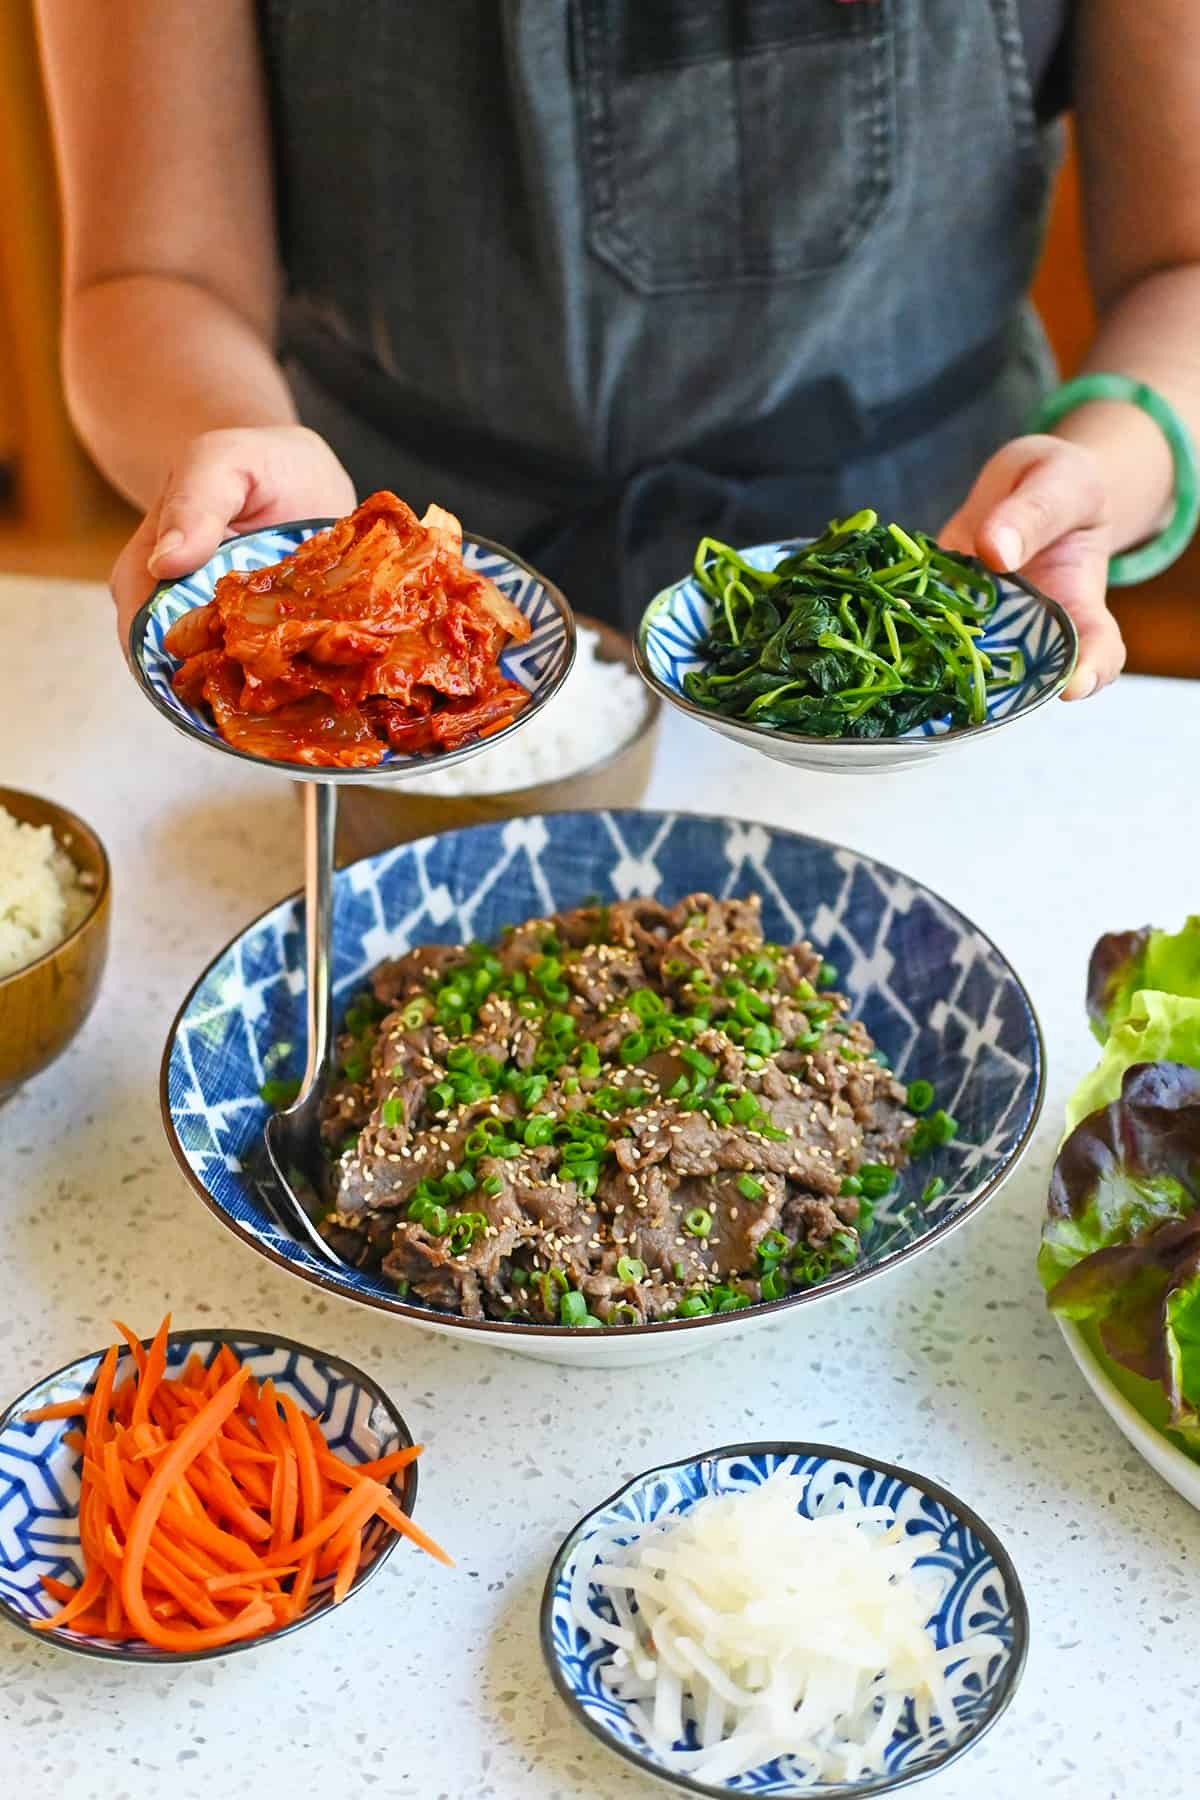 Two hands holding small bowls of kimchi and cooked spinach above a bowl of bulgogi and other small plates of banchan.